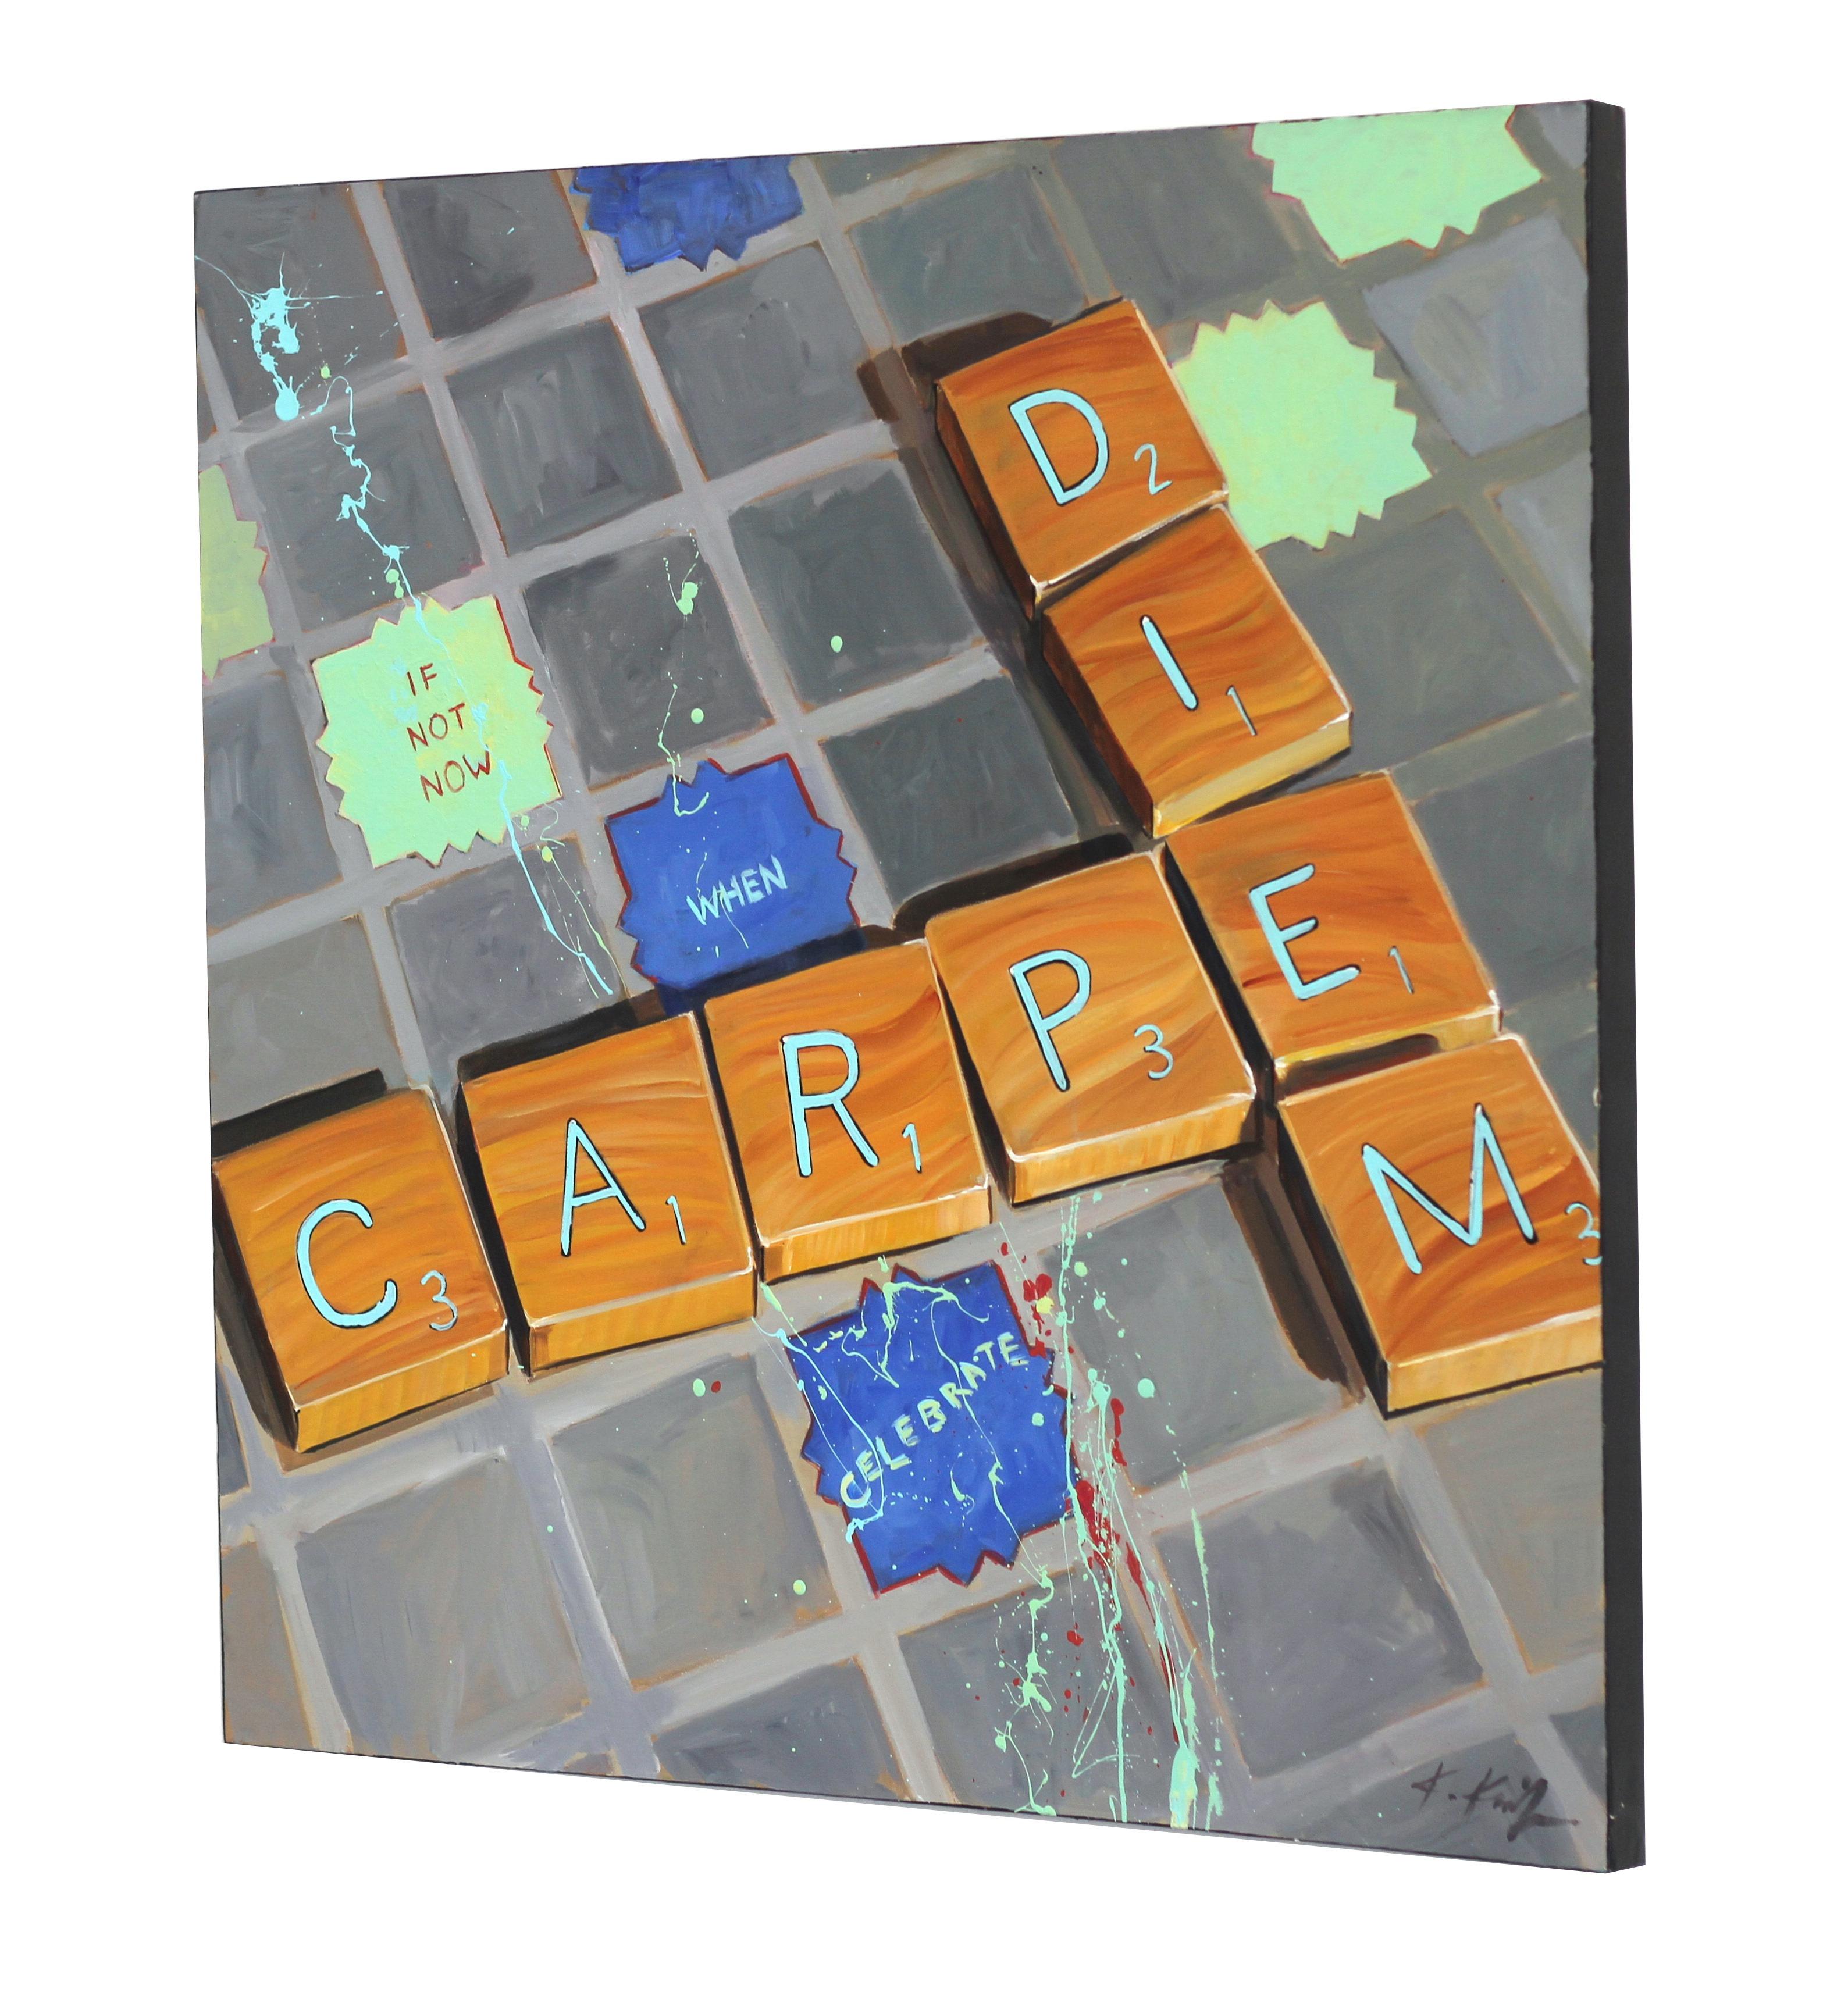 Kathleen Keifer is a California-based internationally collected artist. She is a leading force of the New California Realism. Keifer brings a fresh perspective to her hyperrealistic painted excerpts of popular board games with a keen eye on a clever